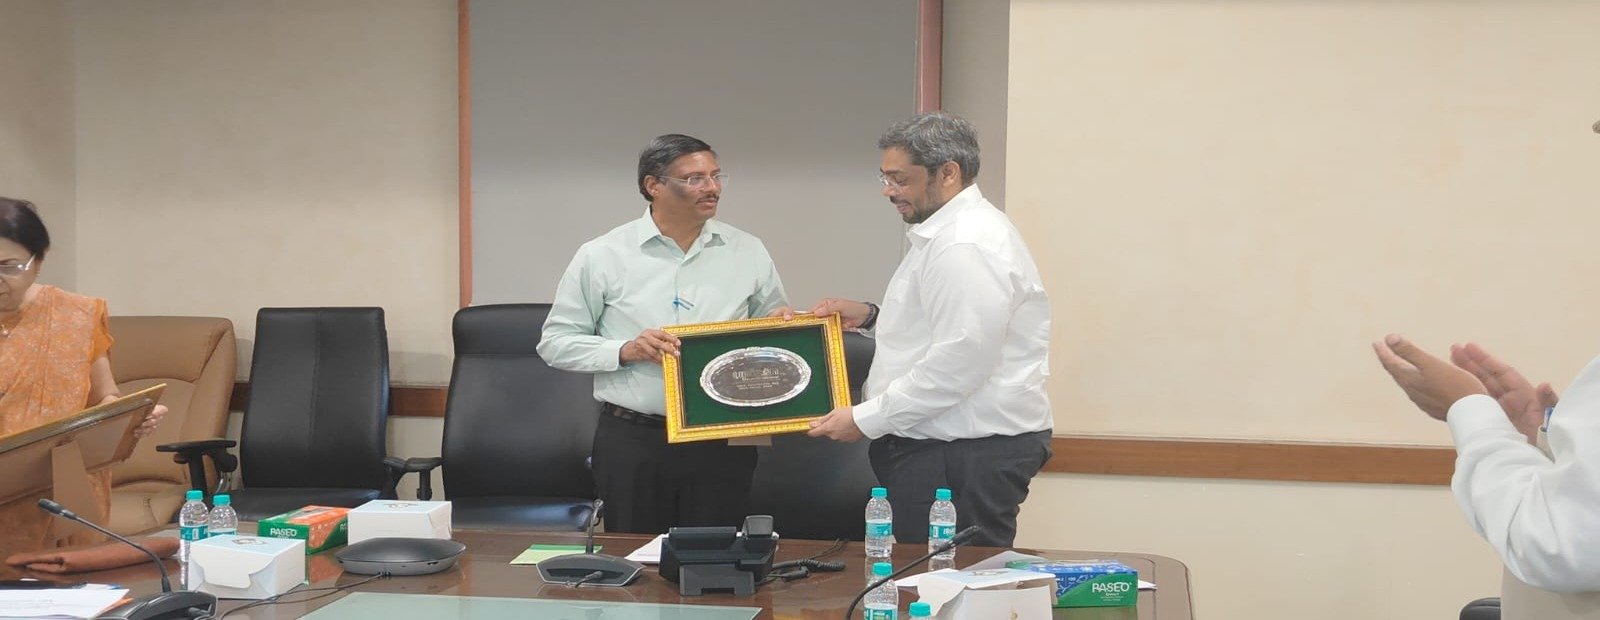 Shri Alok Kumar, Principal Secretary, Department of MSME & Export Promotion and Chairman UPICON being felicitated with a memento by the Managing Director UPICON, Shri Pravin Singh, symbolizing 50 years of innovation and success.